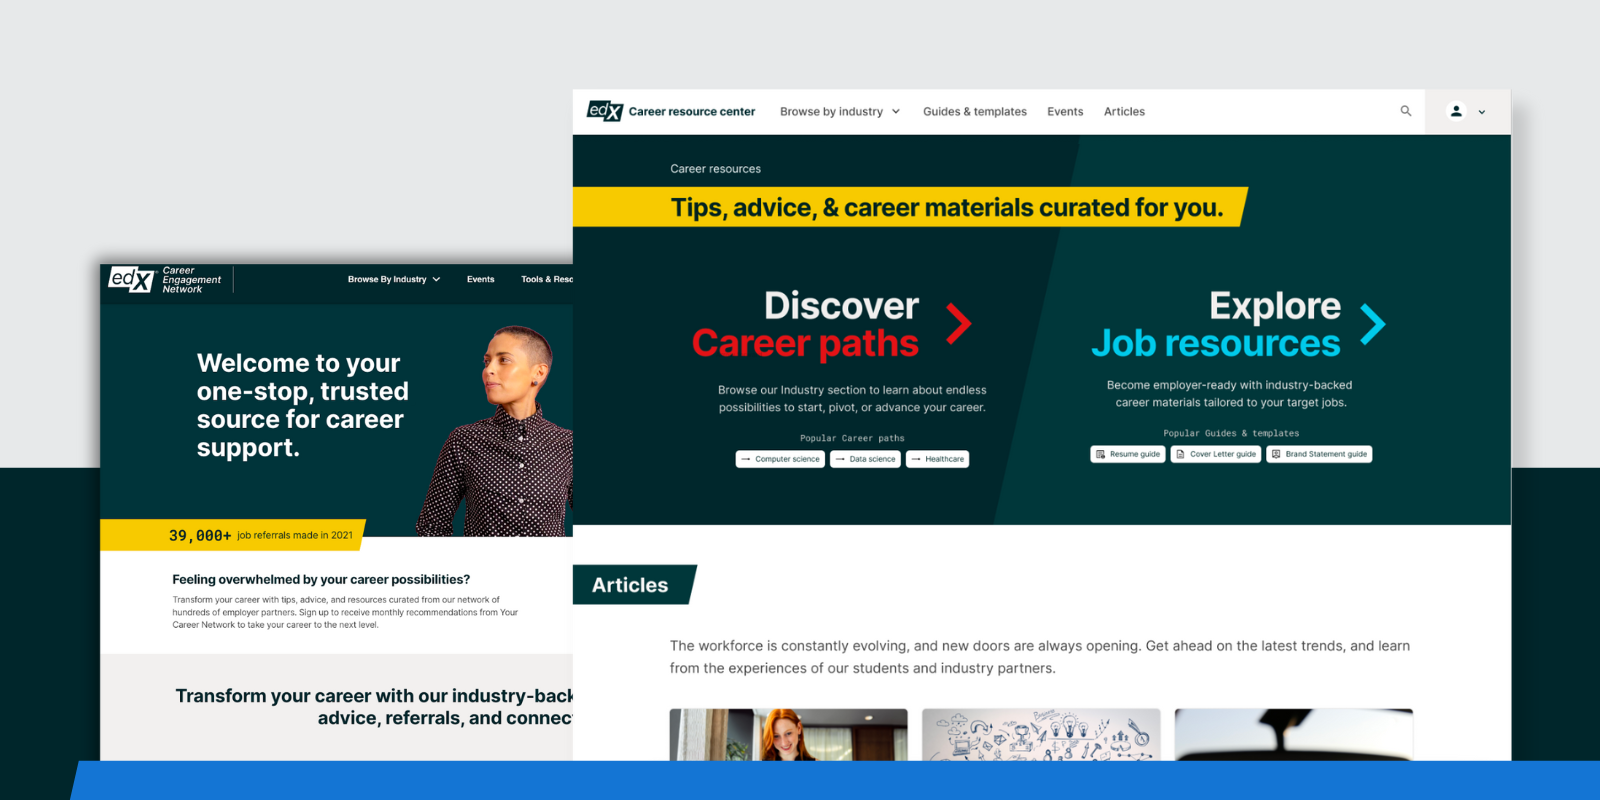 edx-launches-career-resource-center-to-advance-professional